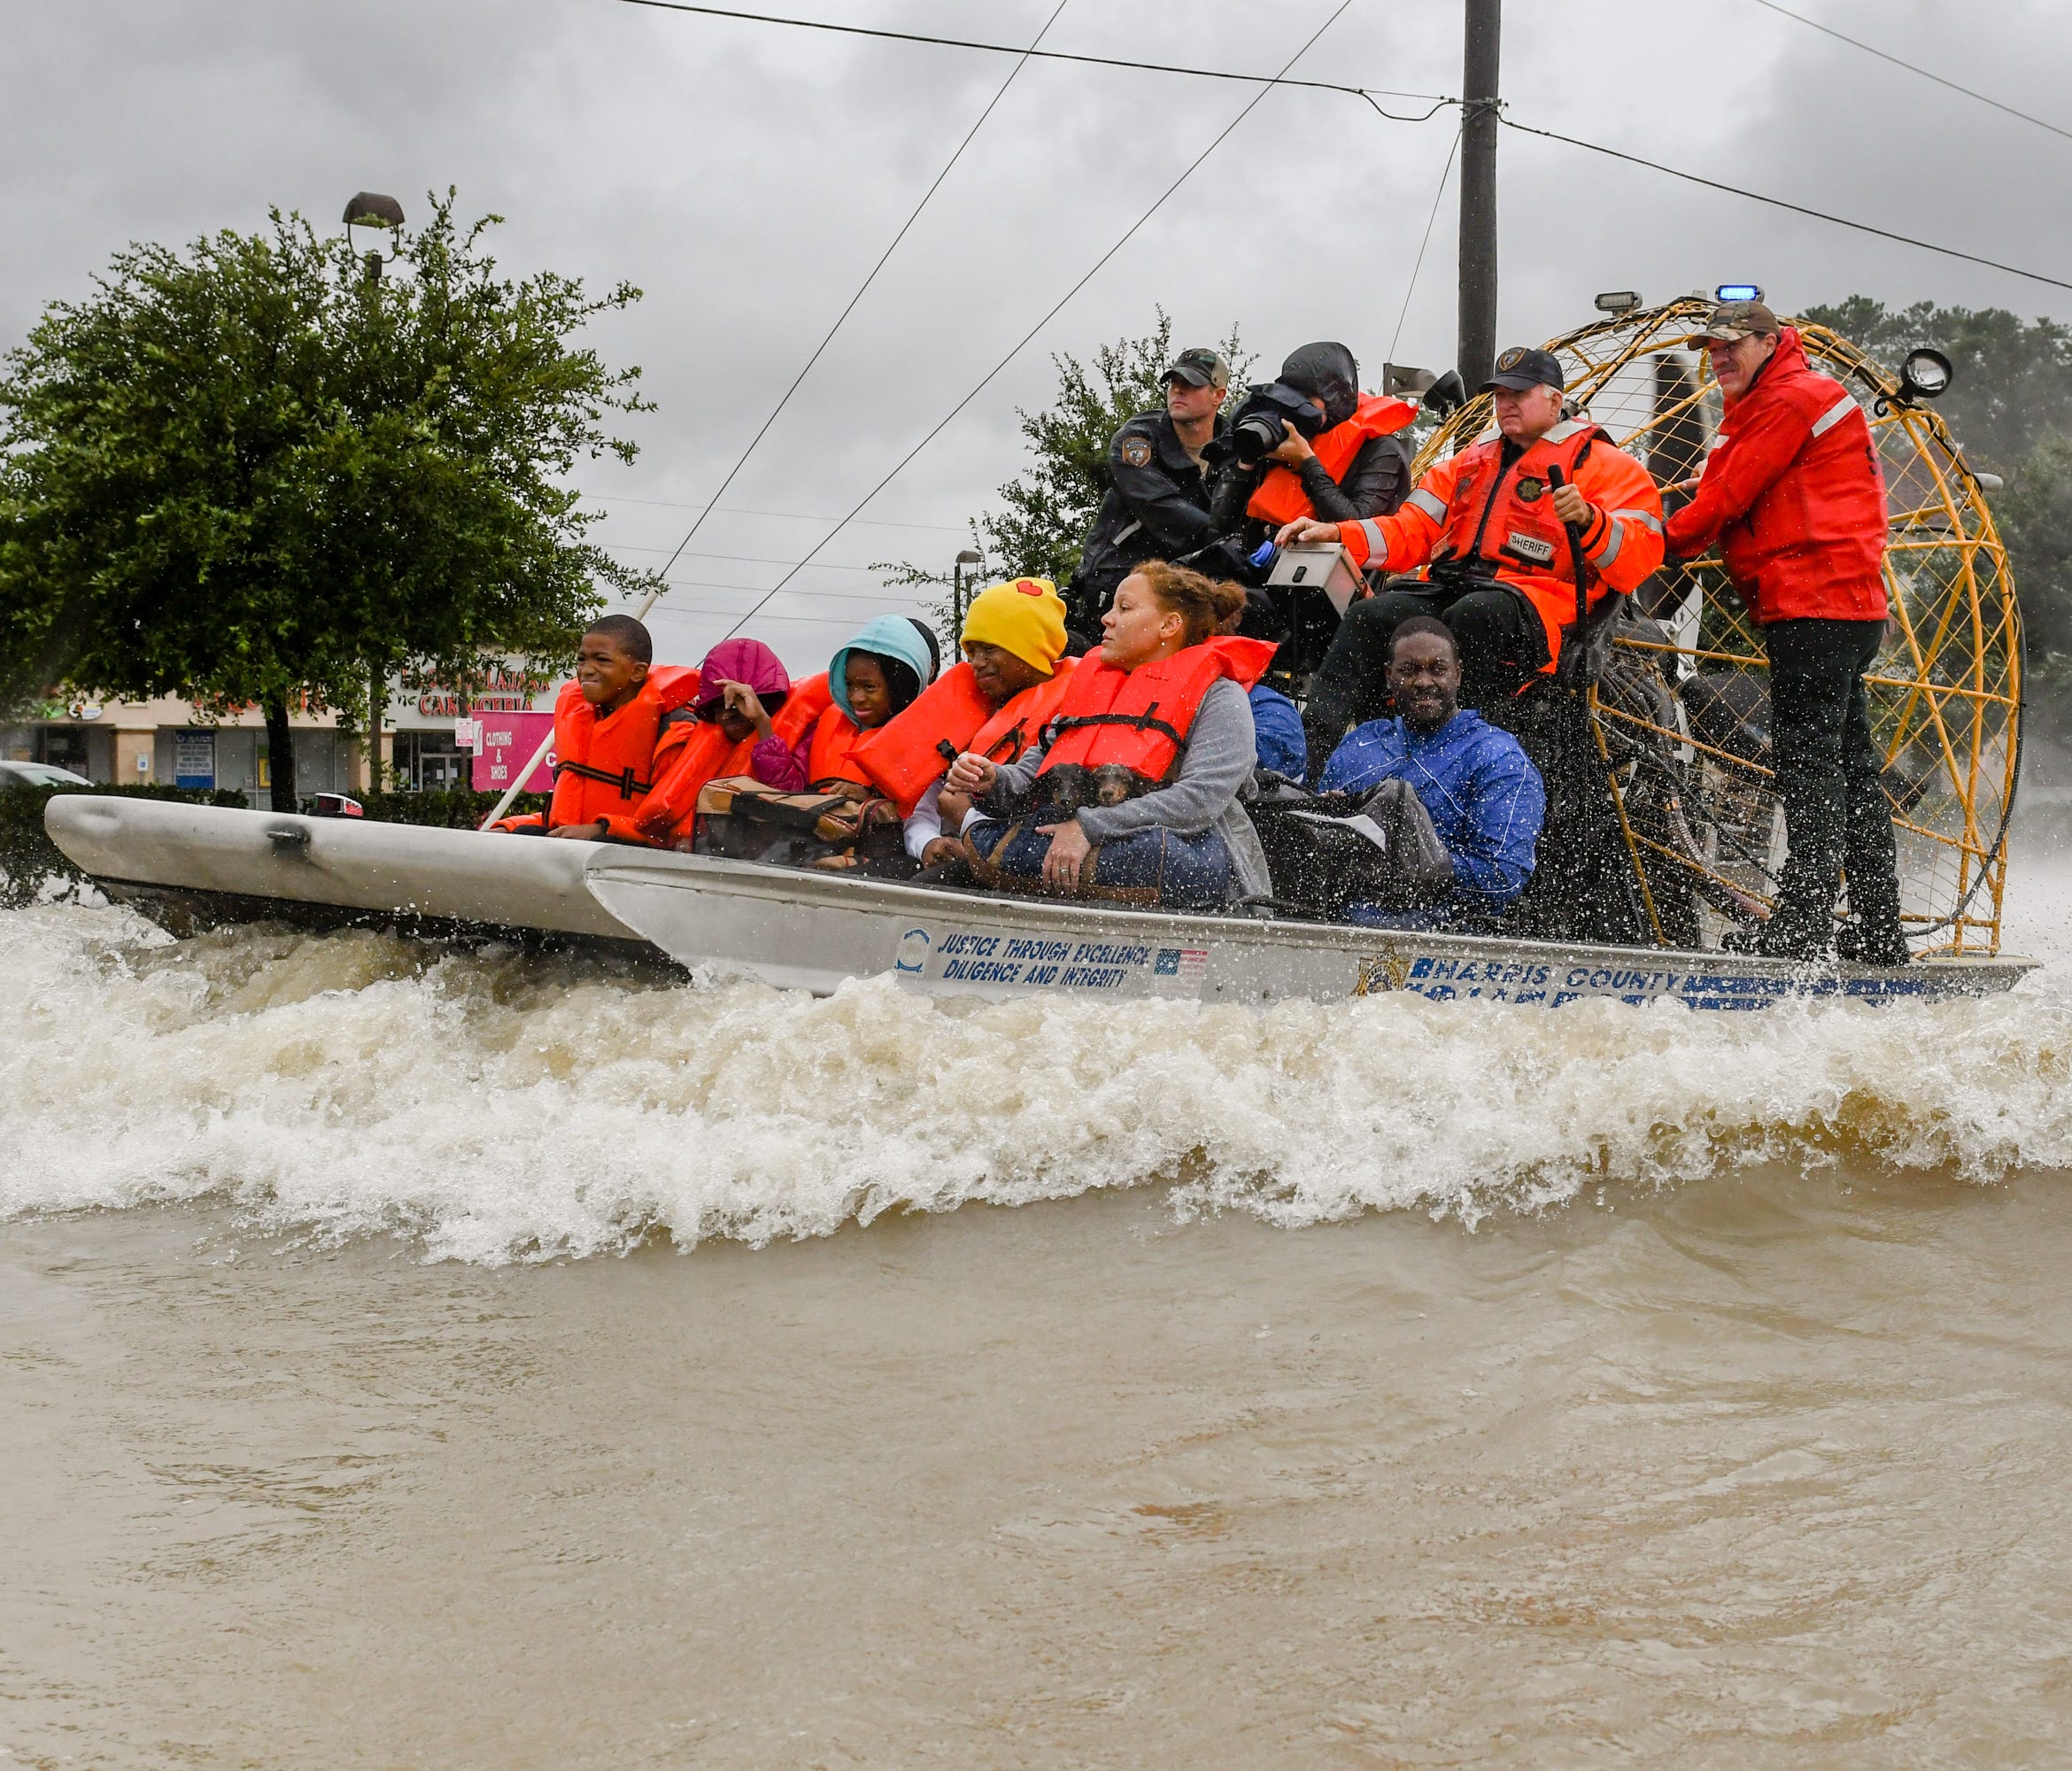 Volunteers and first responders rescue residents from rising flood waters in Houston on Aug. 29, 2017.